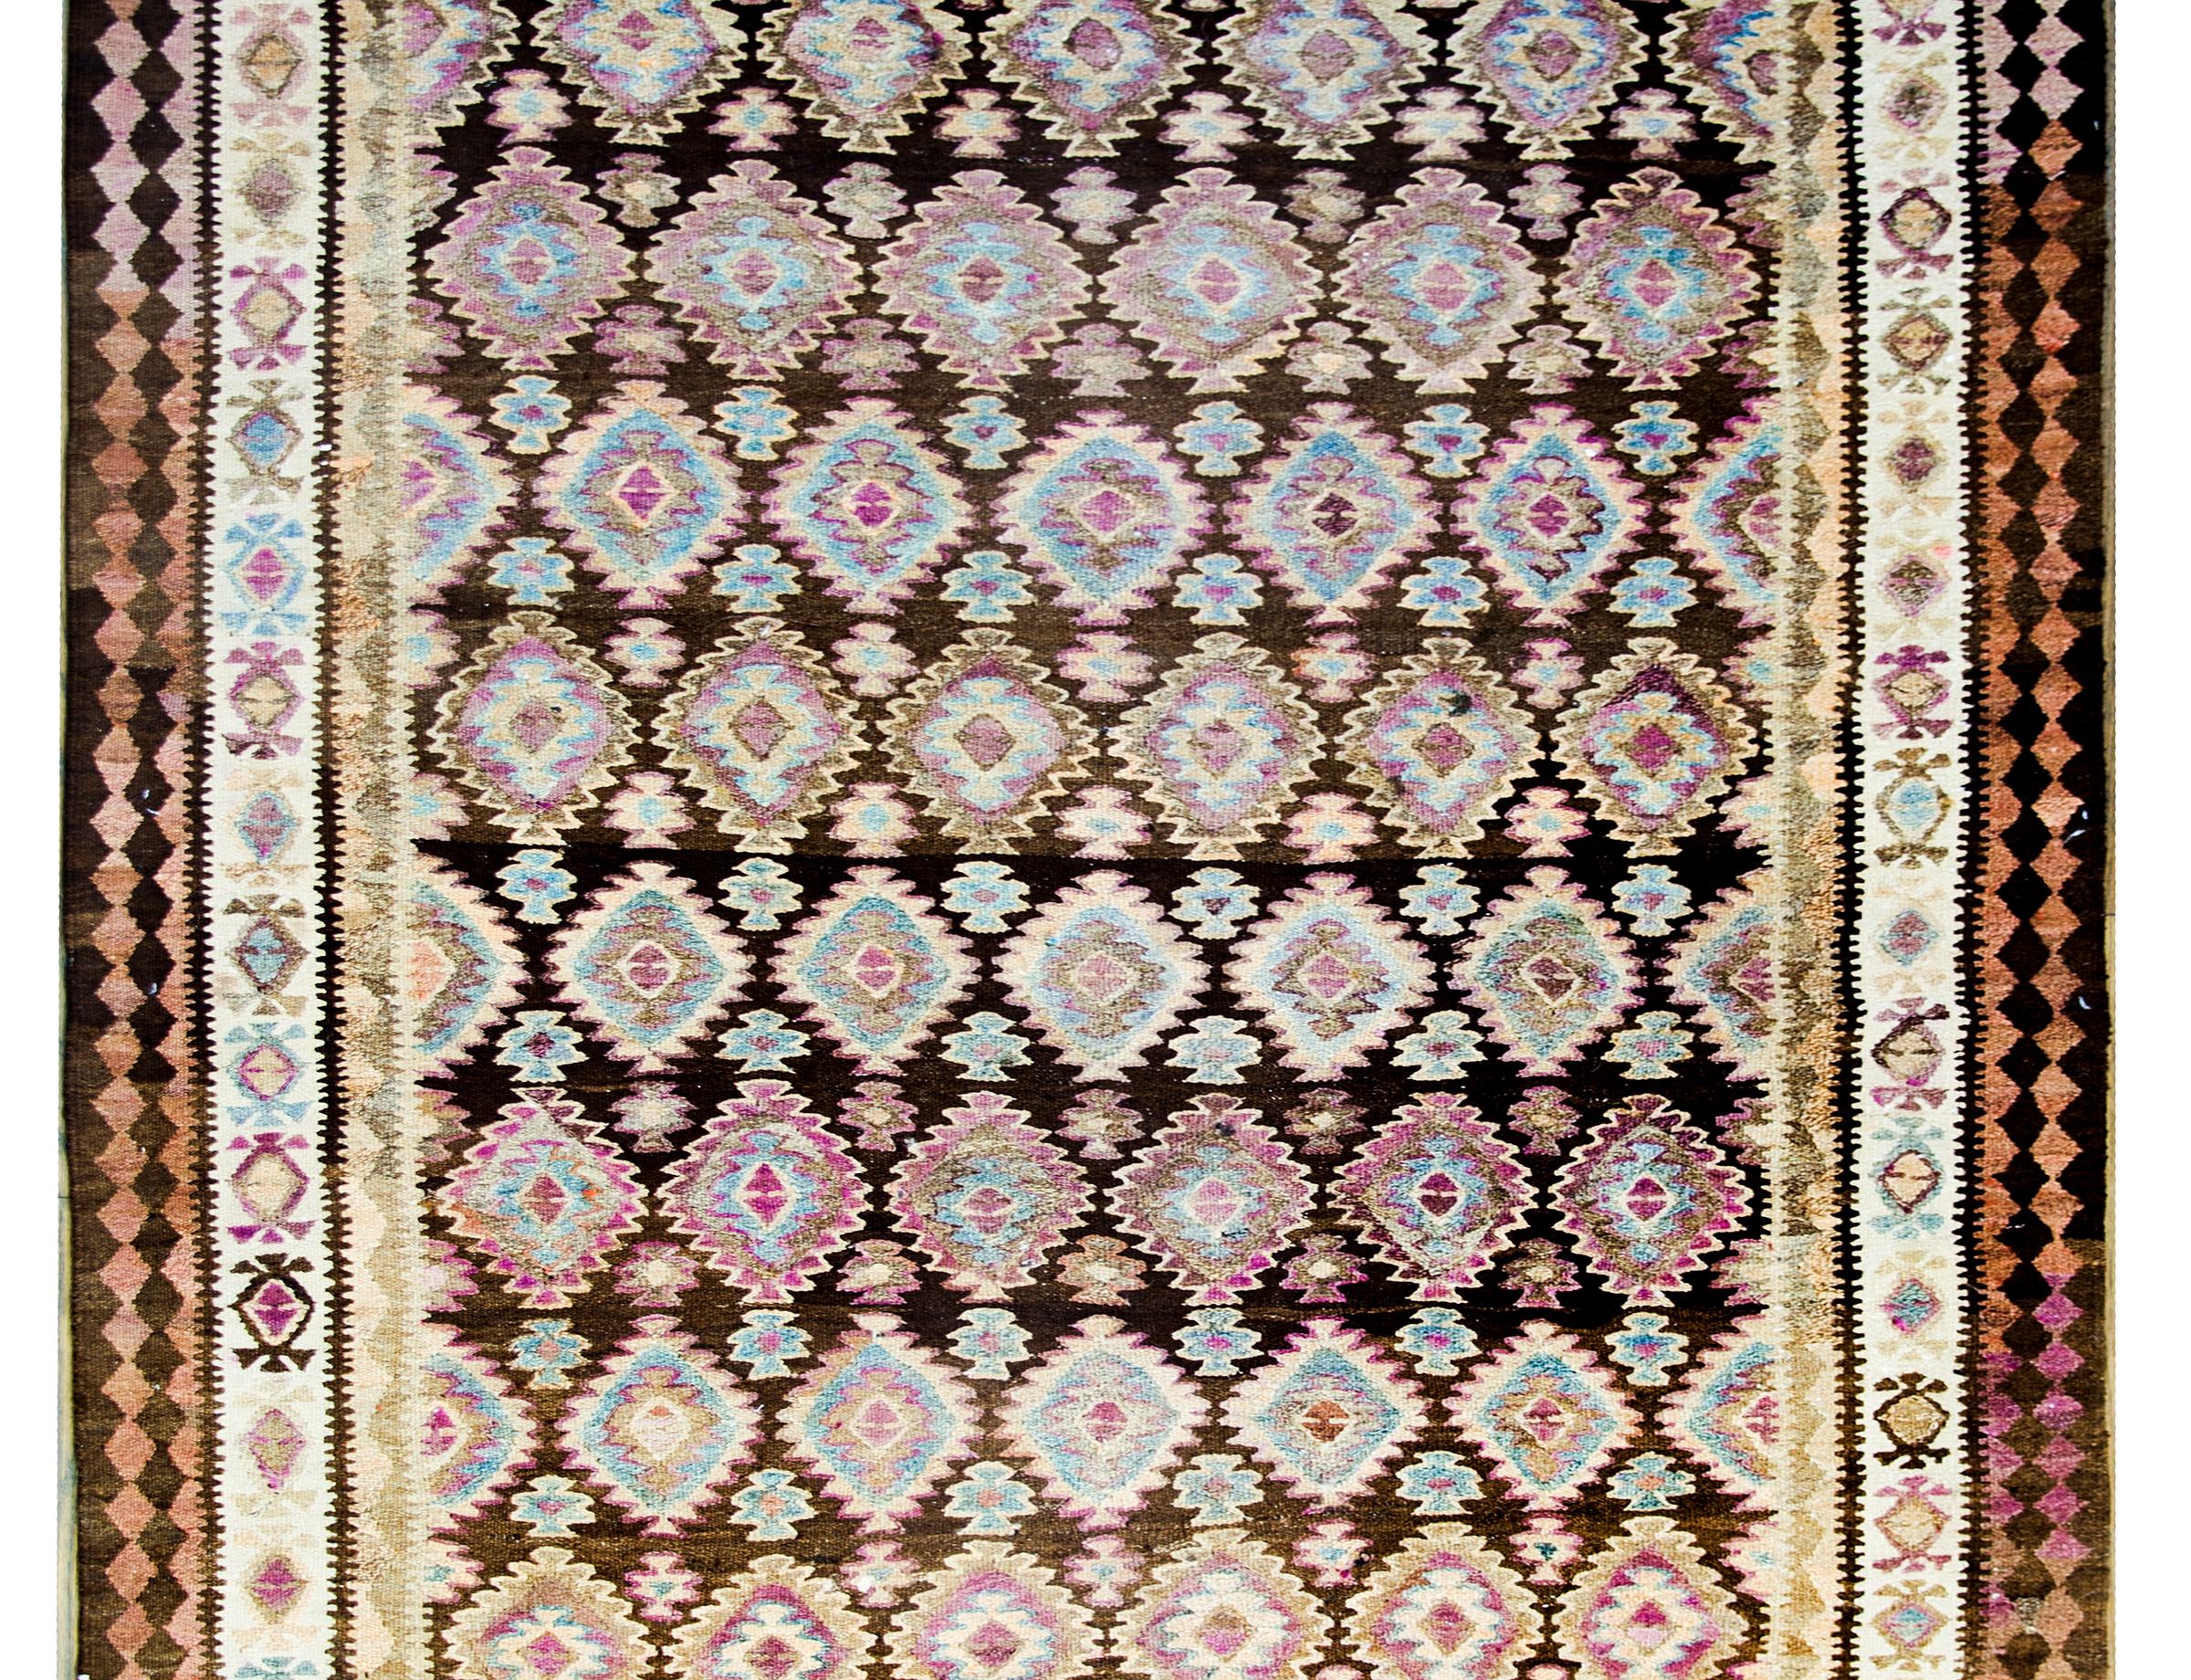 An early 20th century Persian Qazvin kilim rug with an all-over diamond pattern woven in multi-colored wool, and surrounded by a complex border of geometric patterned stripes.